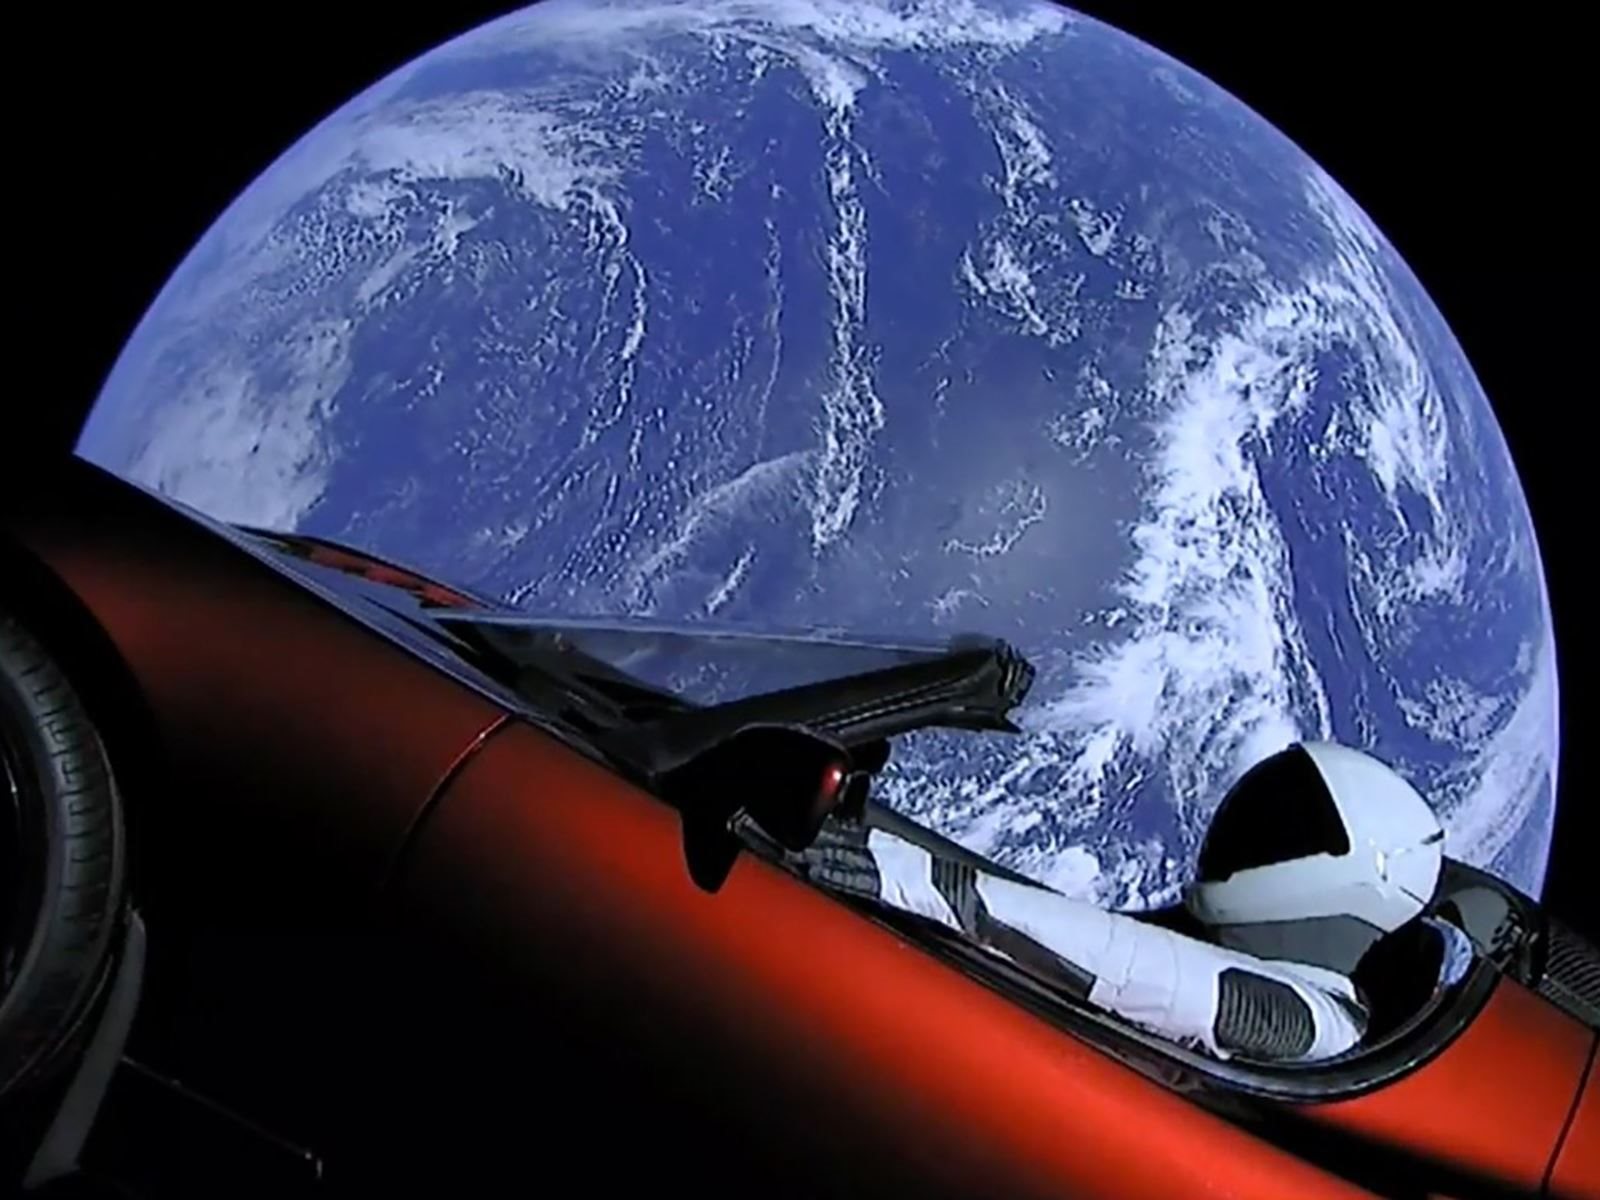 Roadster 2021 In Space Wallpapers